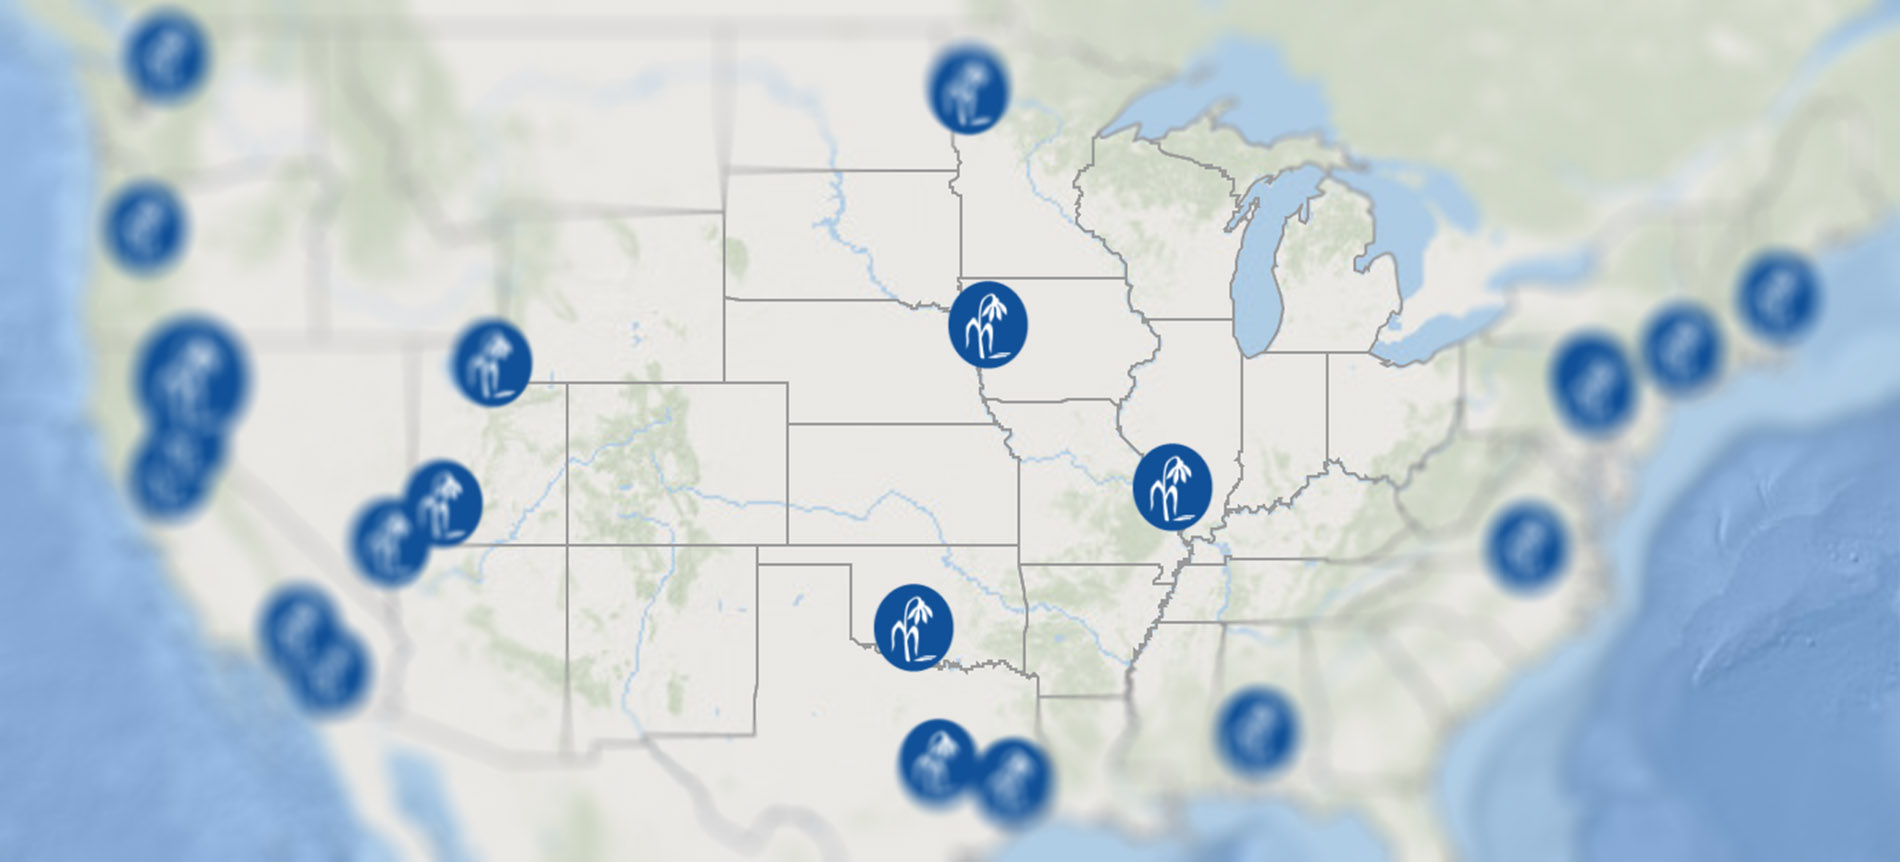 Creating Resilient Water Utilities - Case Study and Information Exchange Map